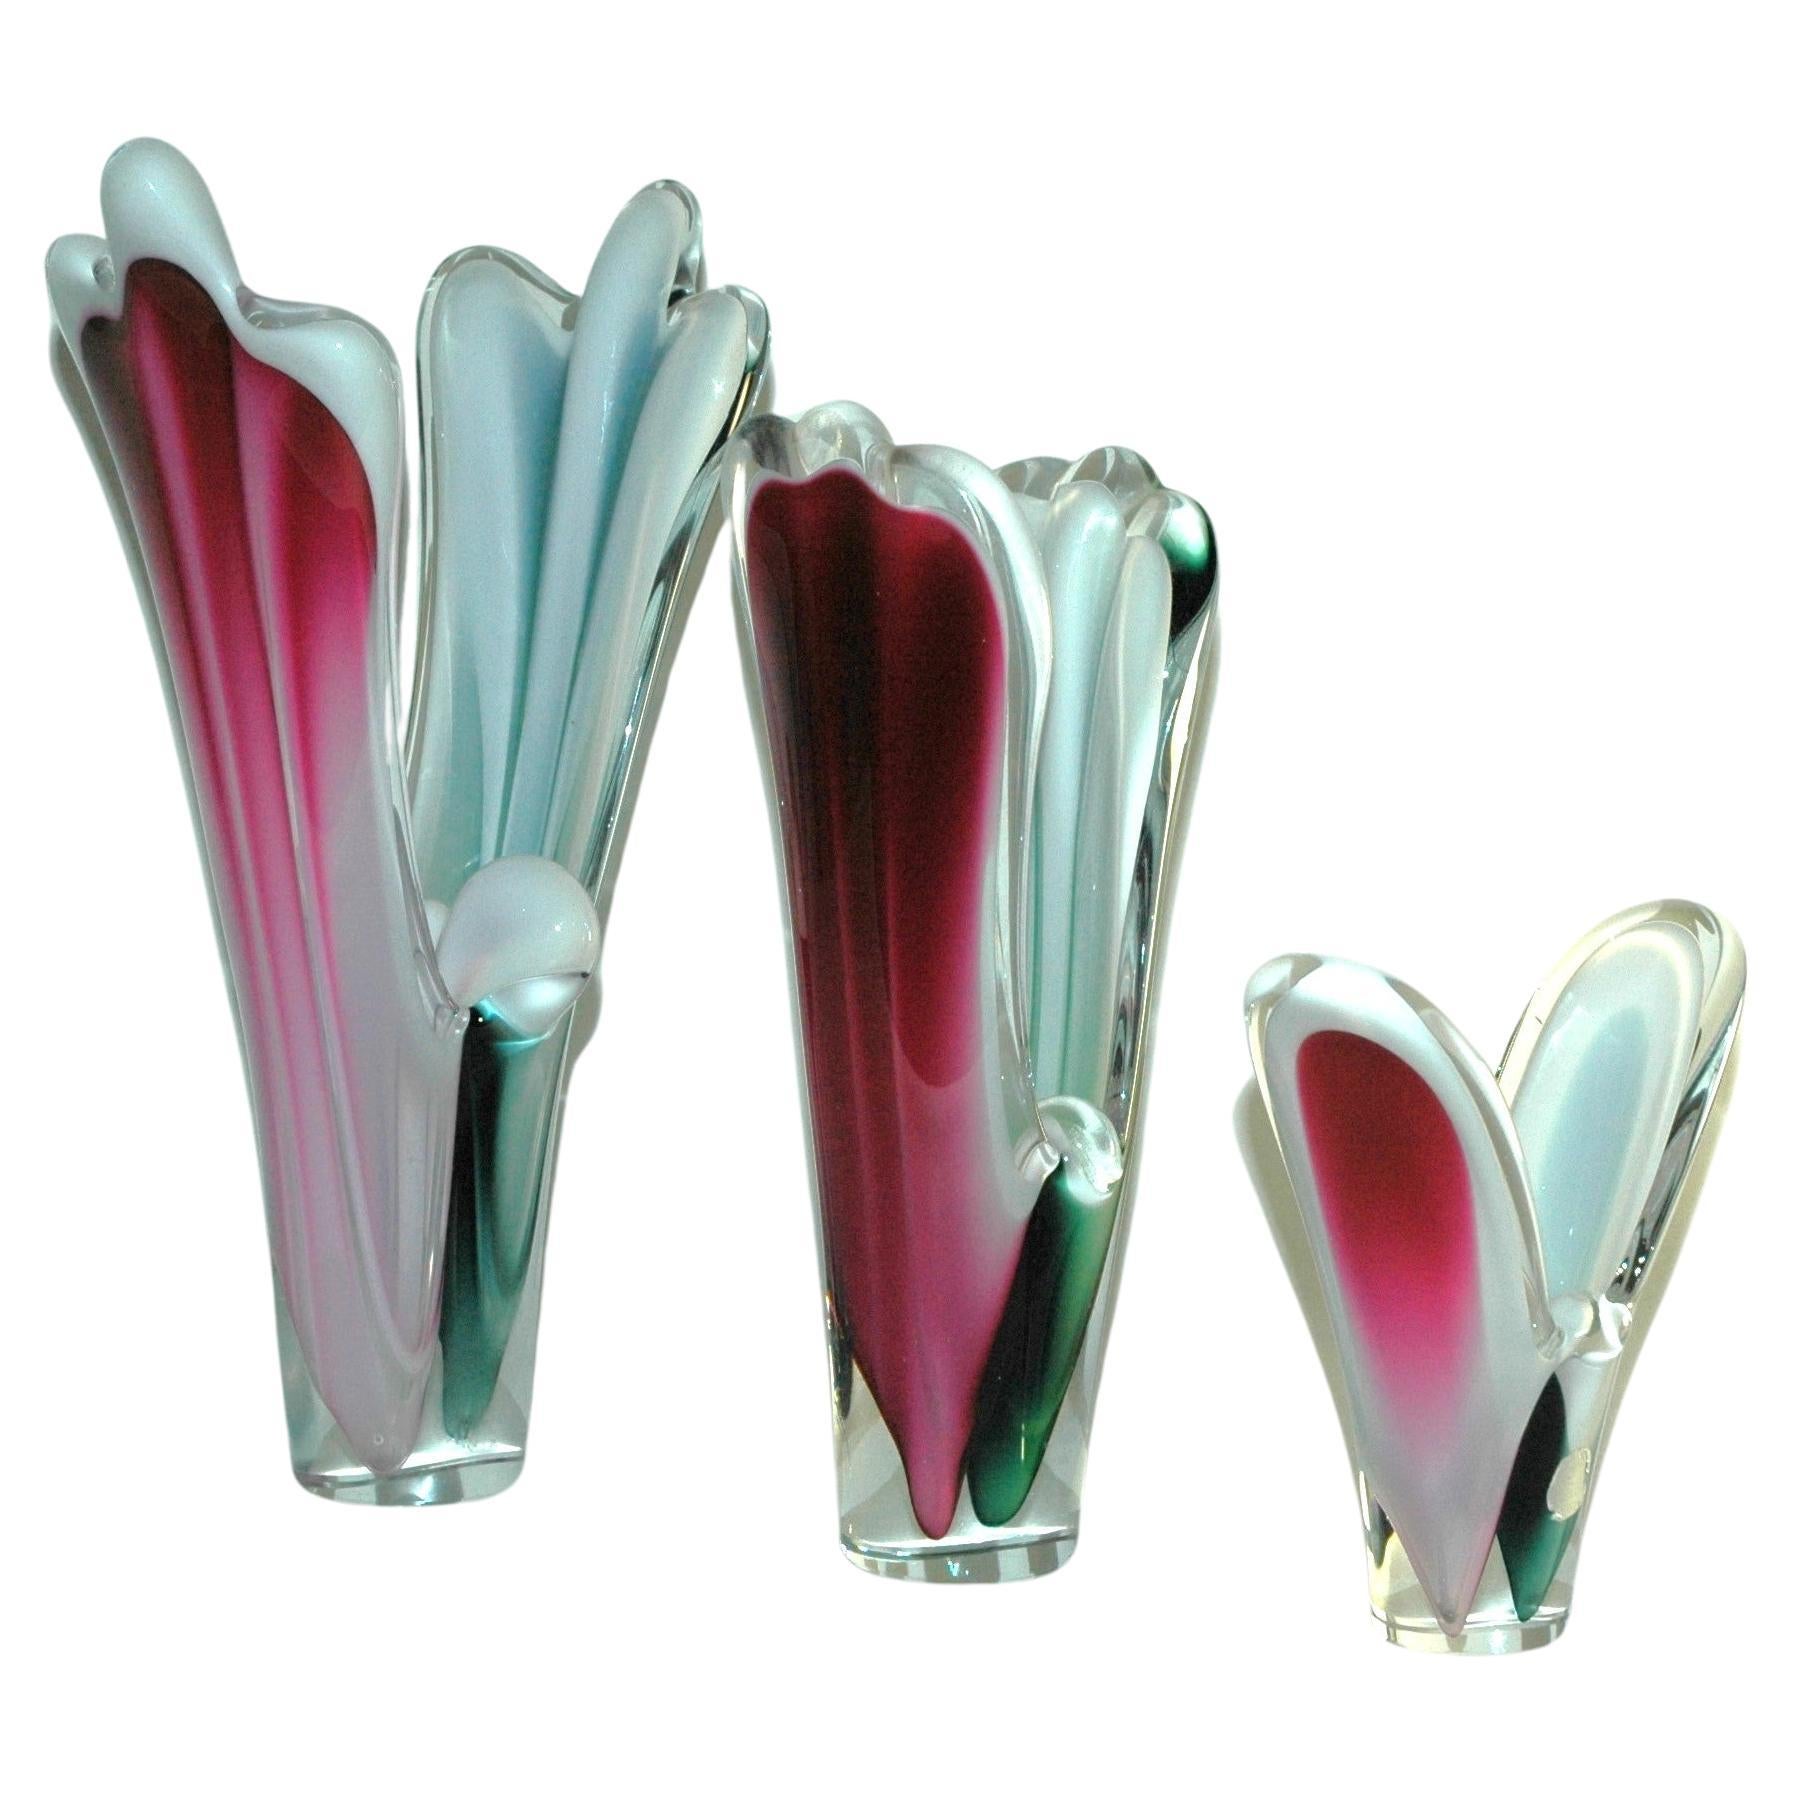 Exciting 3 parts of the famous Flygsfors Coquille mid 19th century glass vase